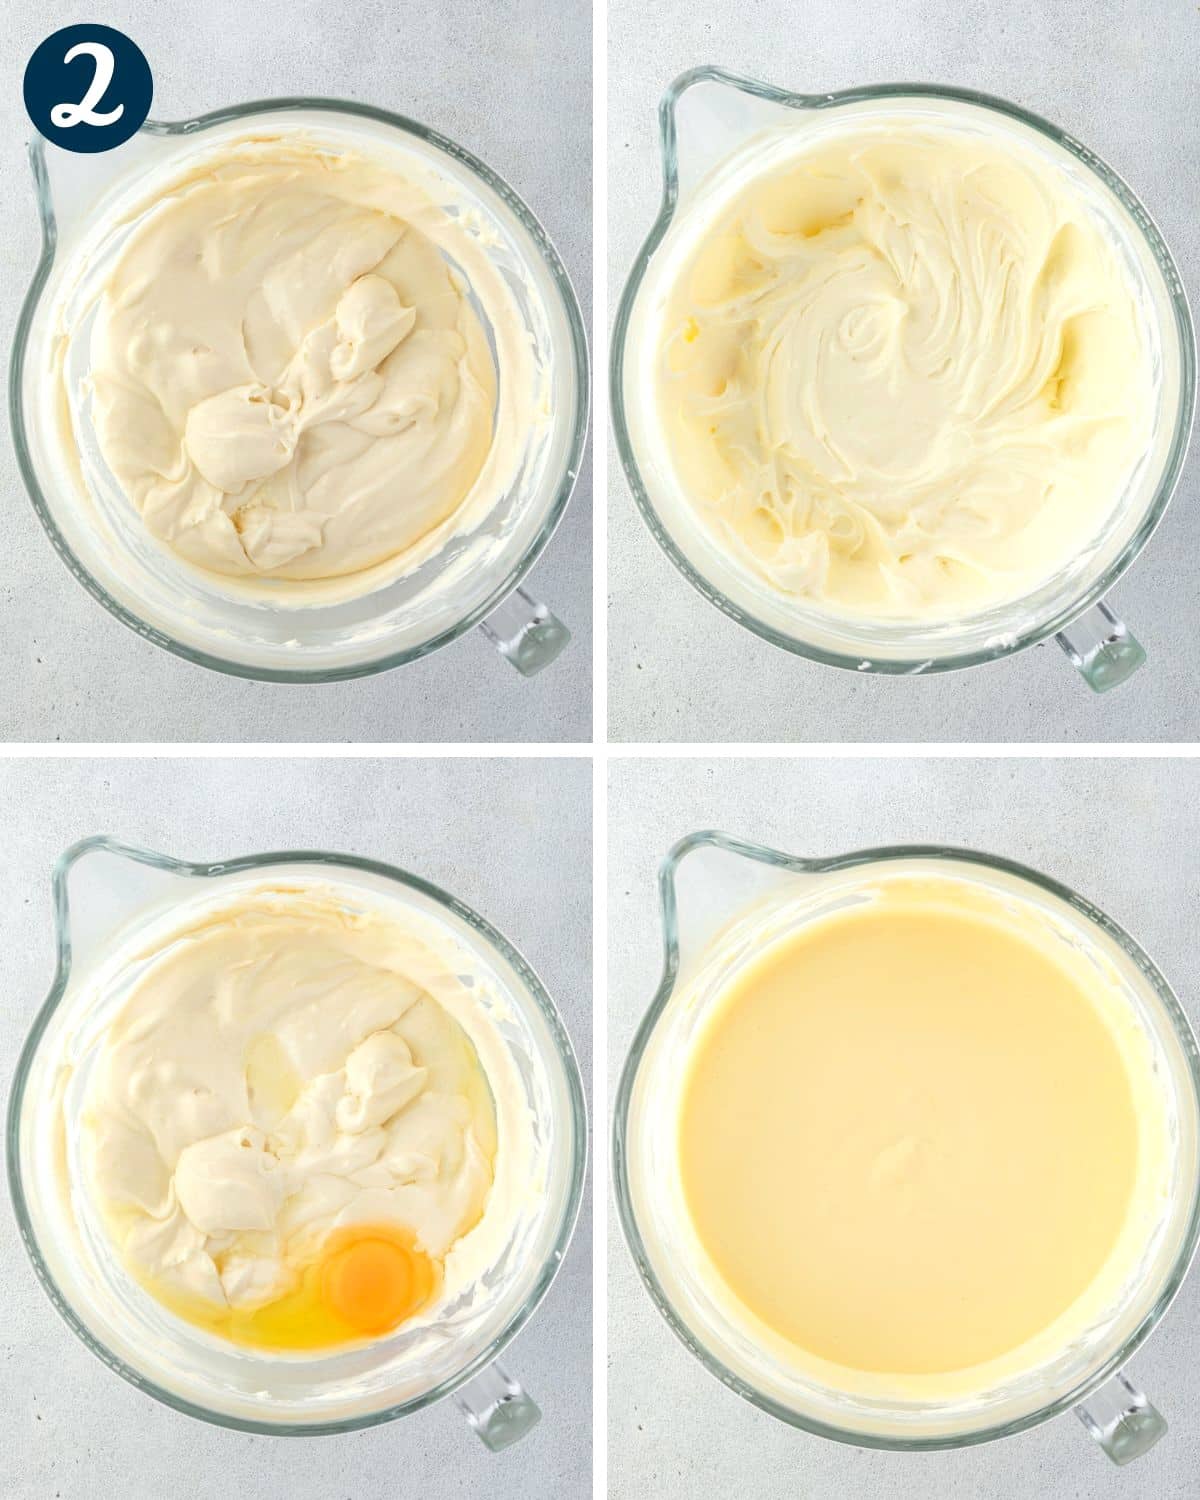 Four photos of a mixing bowl with ingredients being combined to make cheesecake batter.